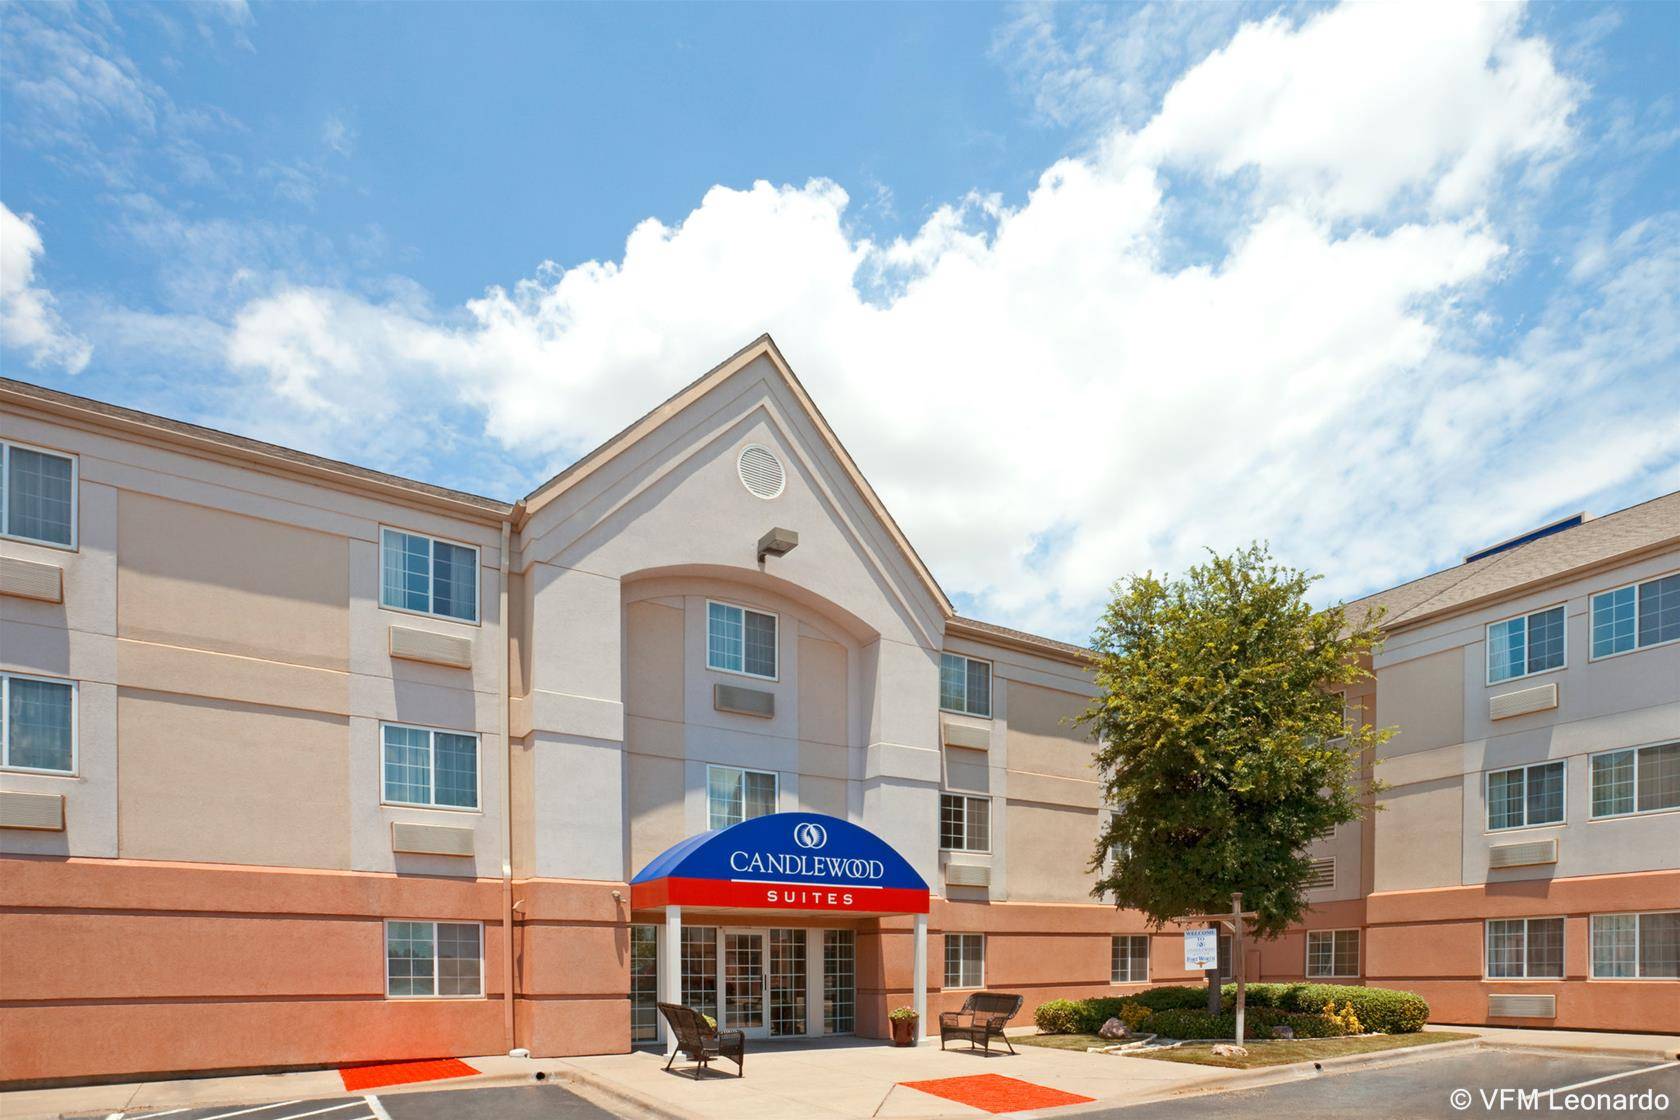 CANDLEWOOD SUITES DALLAS, FT W